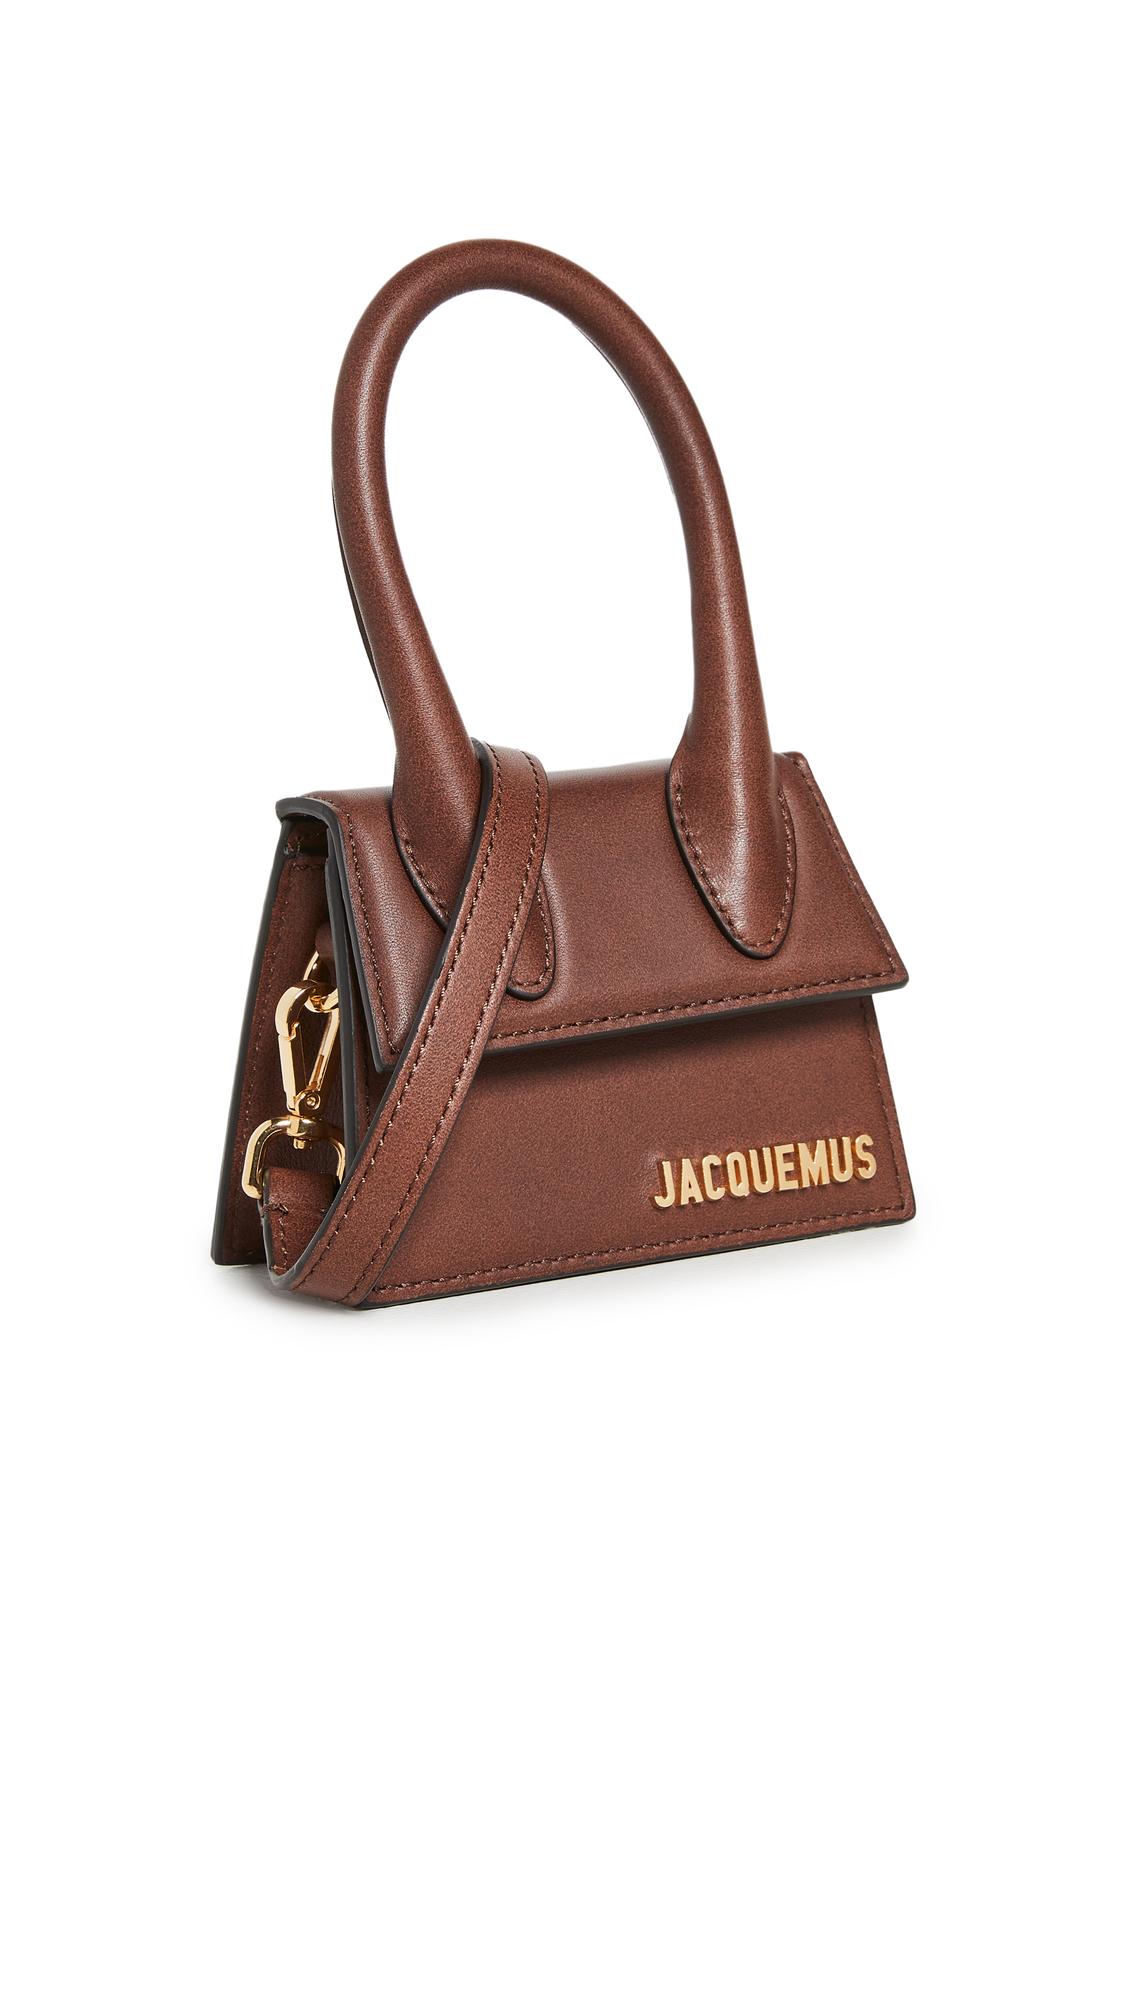 Jacquemus Le Chiquito Bag in Brown | Lyst